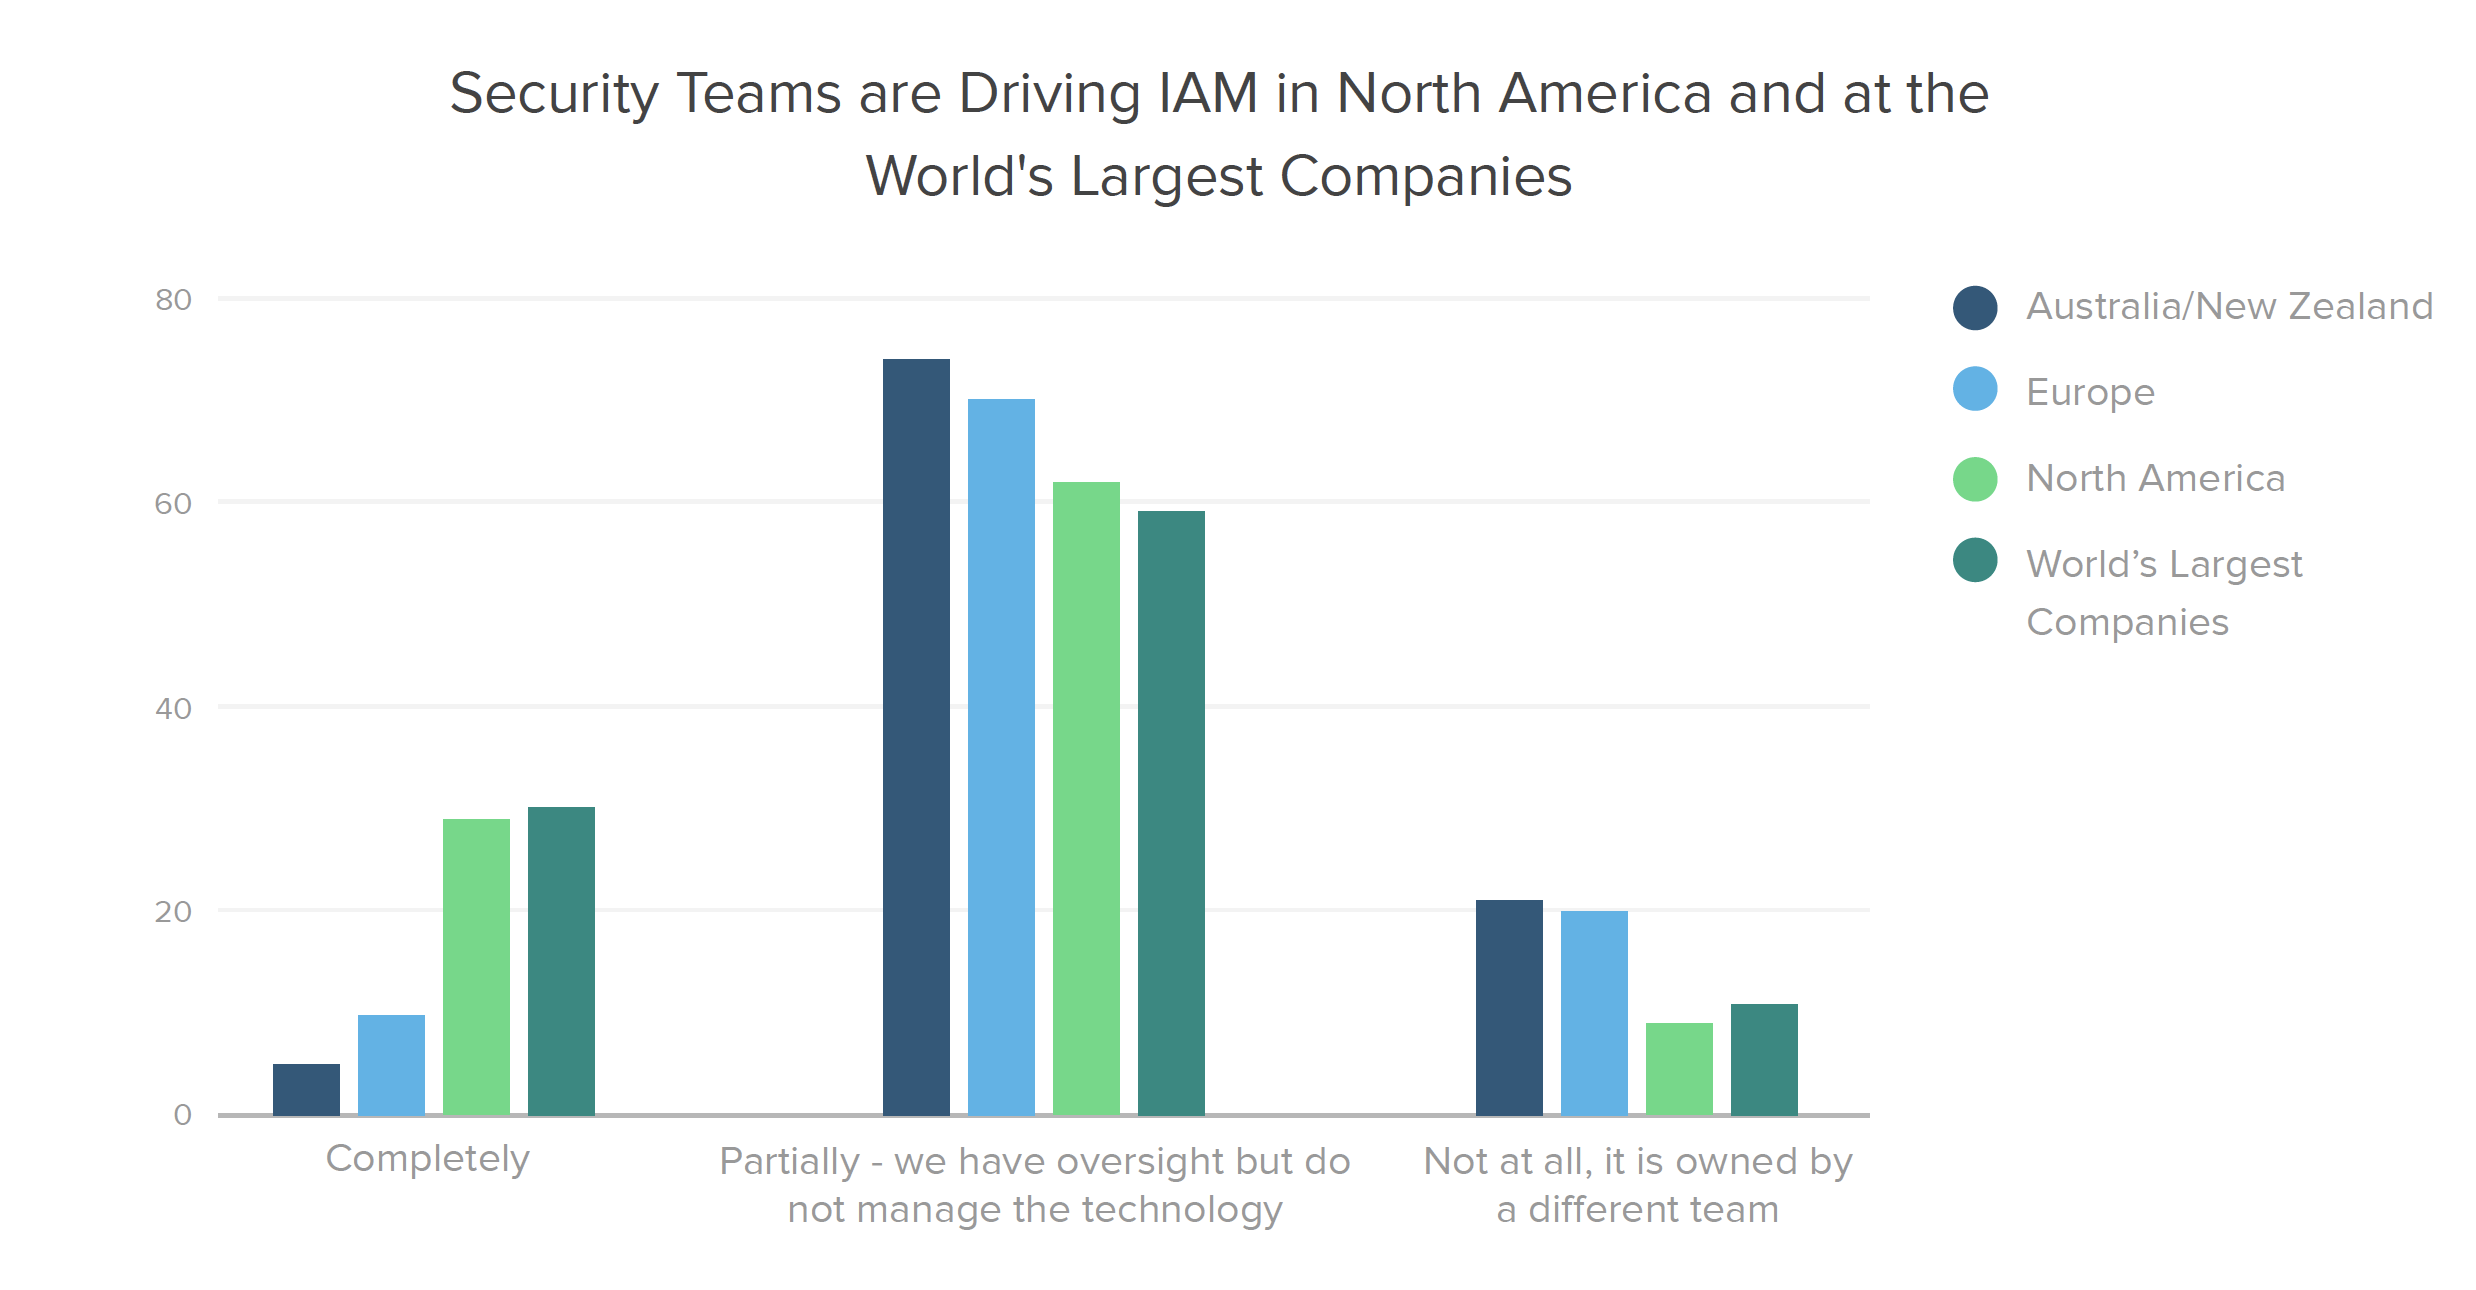 Security Teams are Driving IAM in North America and at the World's Largest Companies